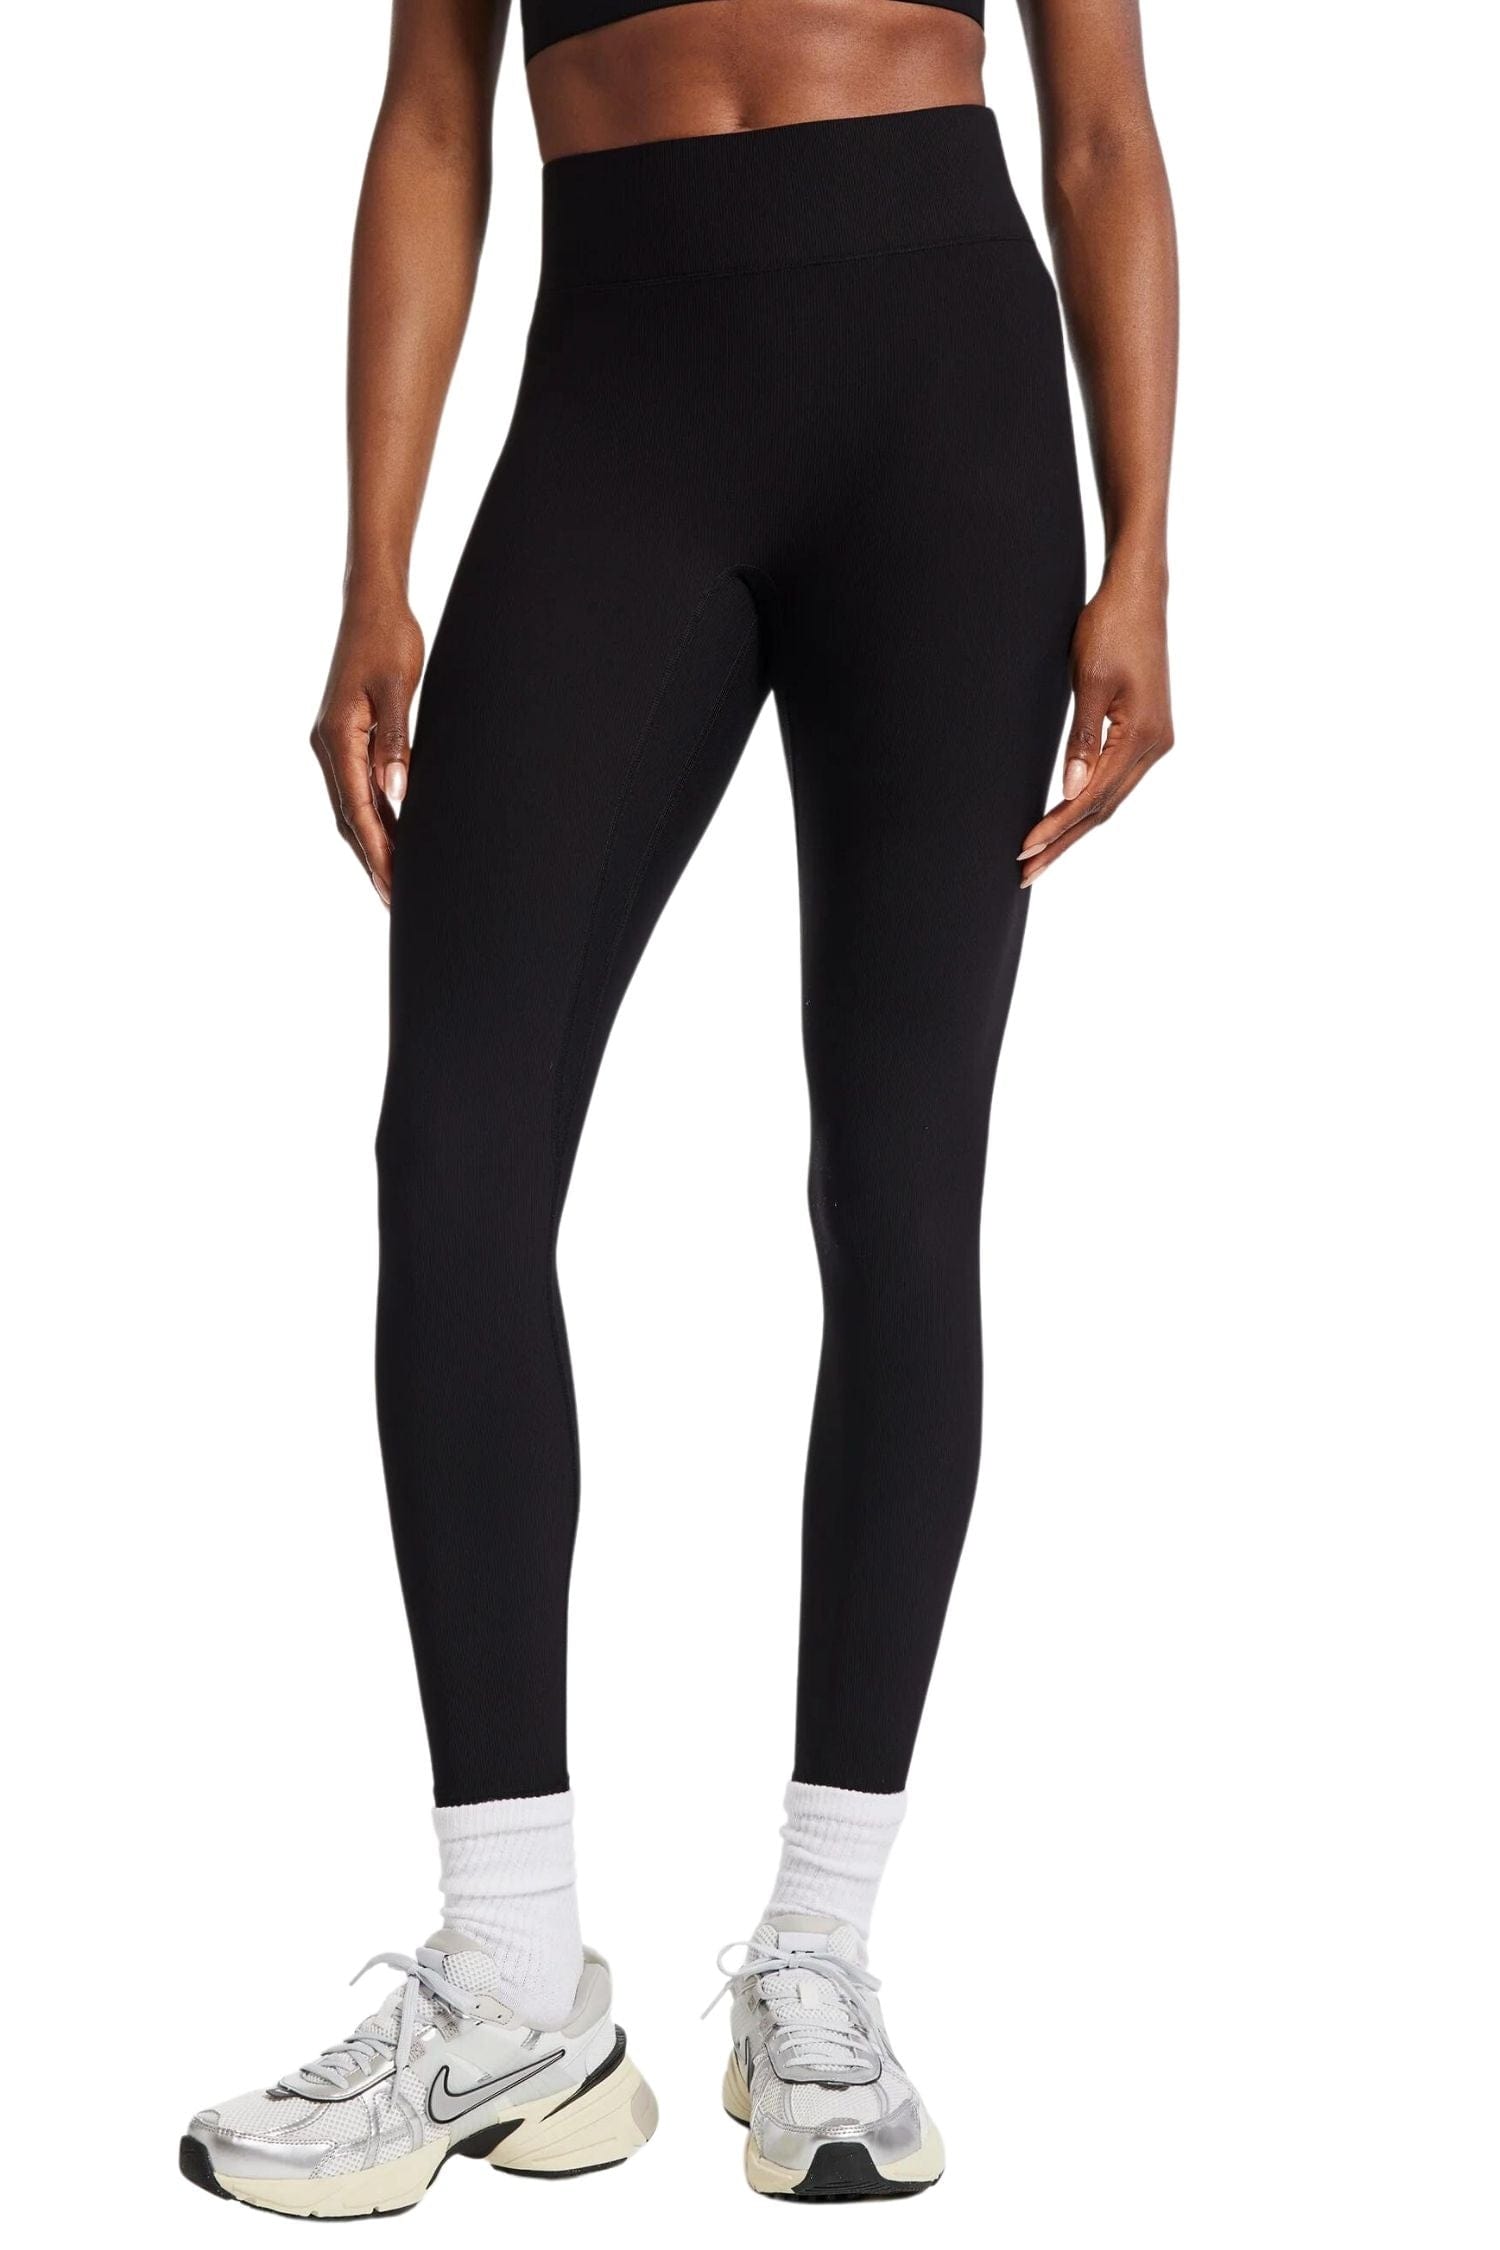 All Access By Bandier Center Stage Rib Legging – Fitness Hub Shop